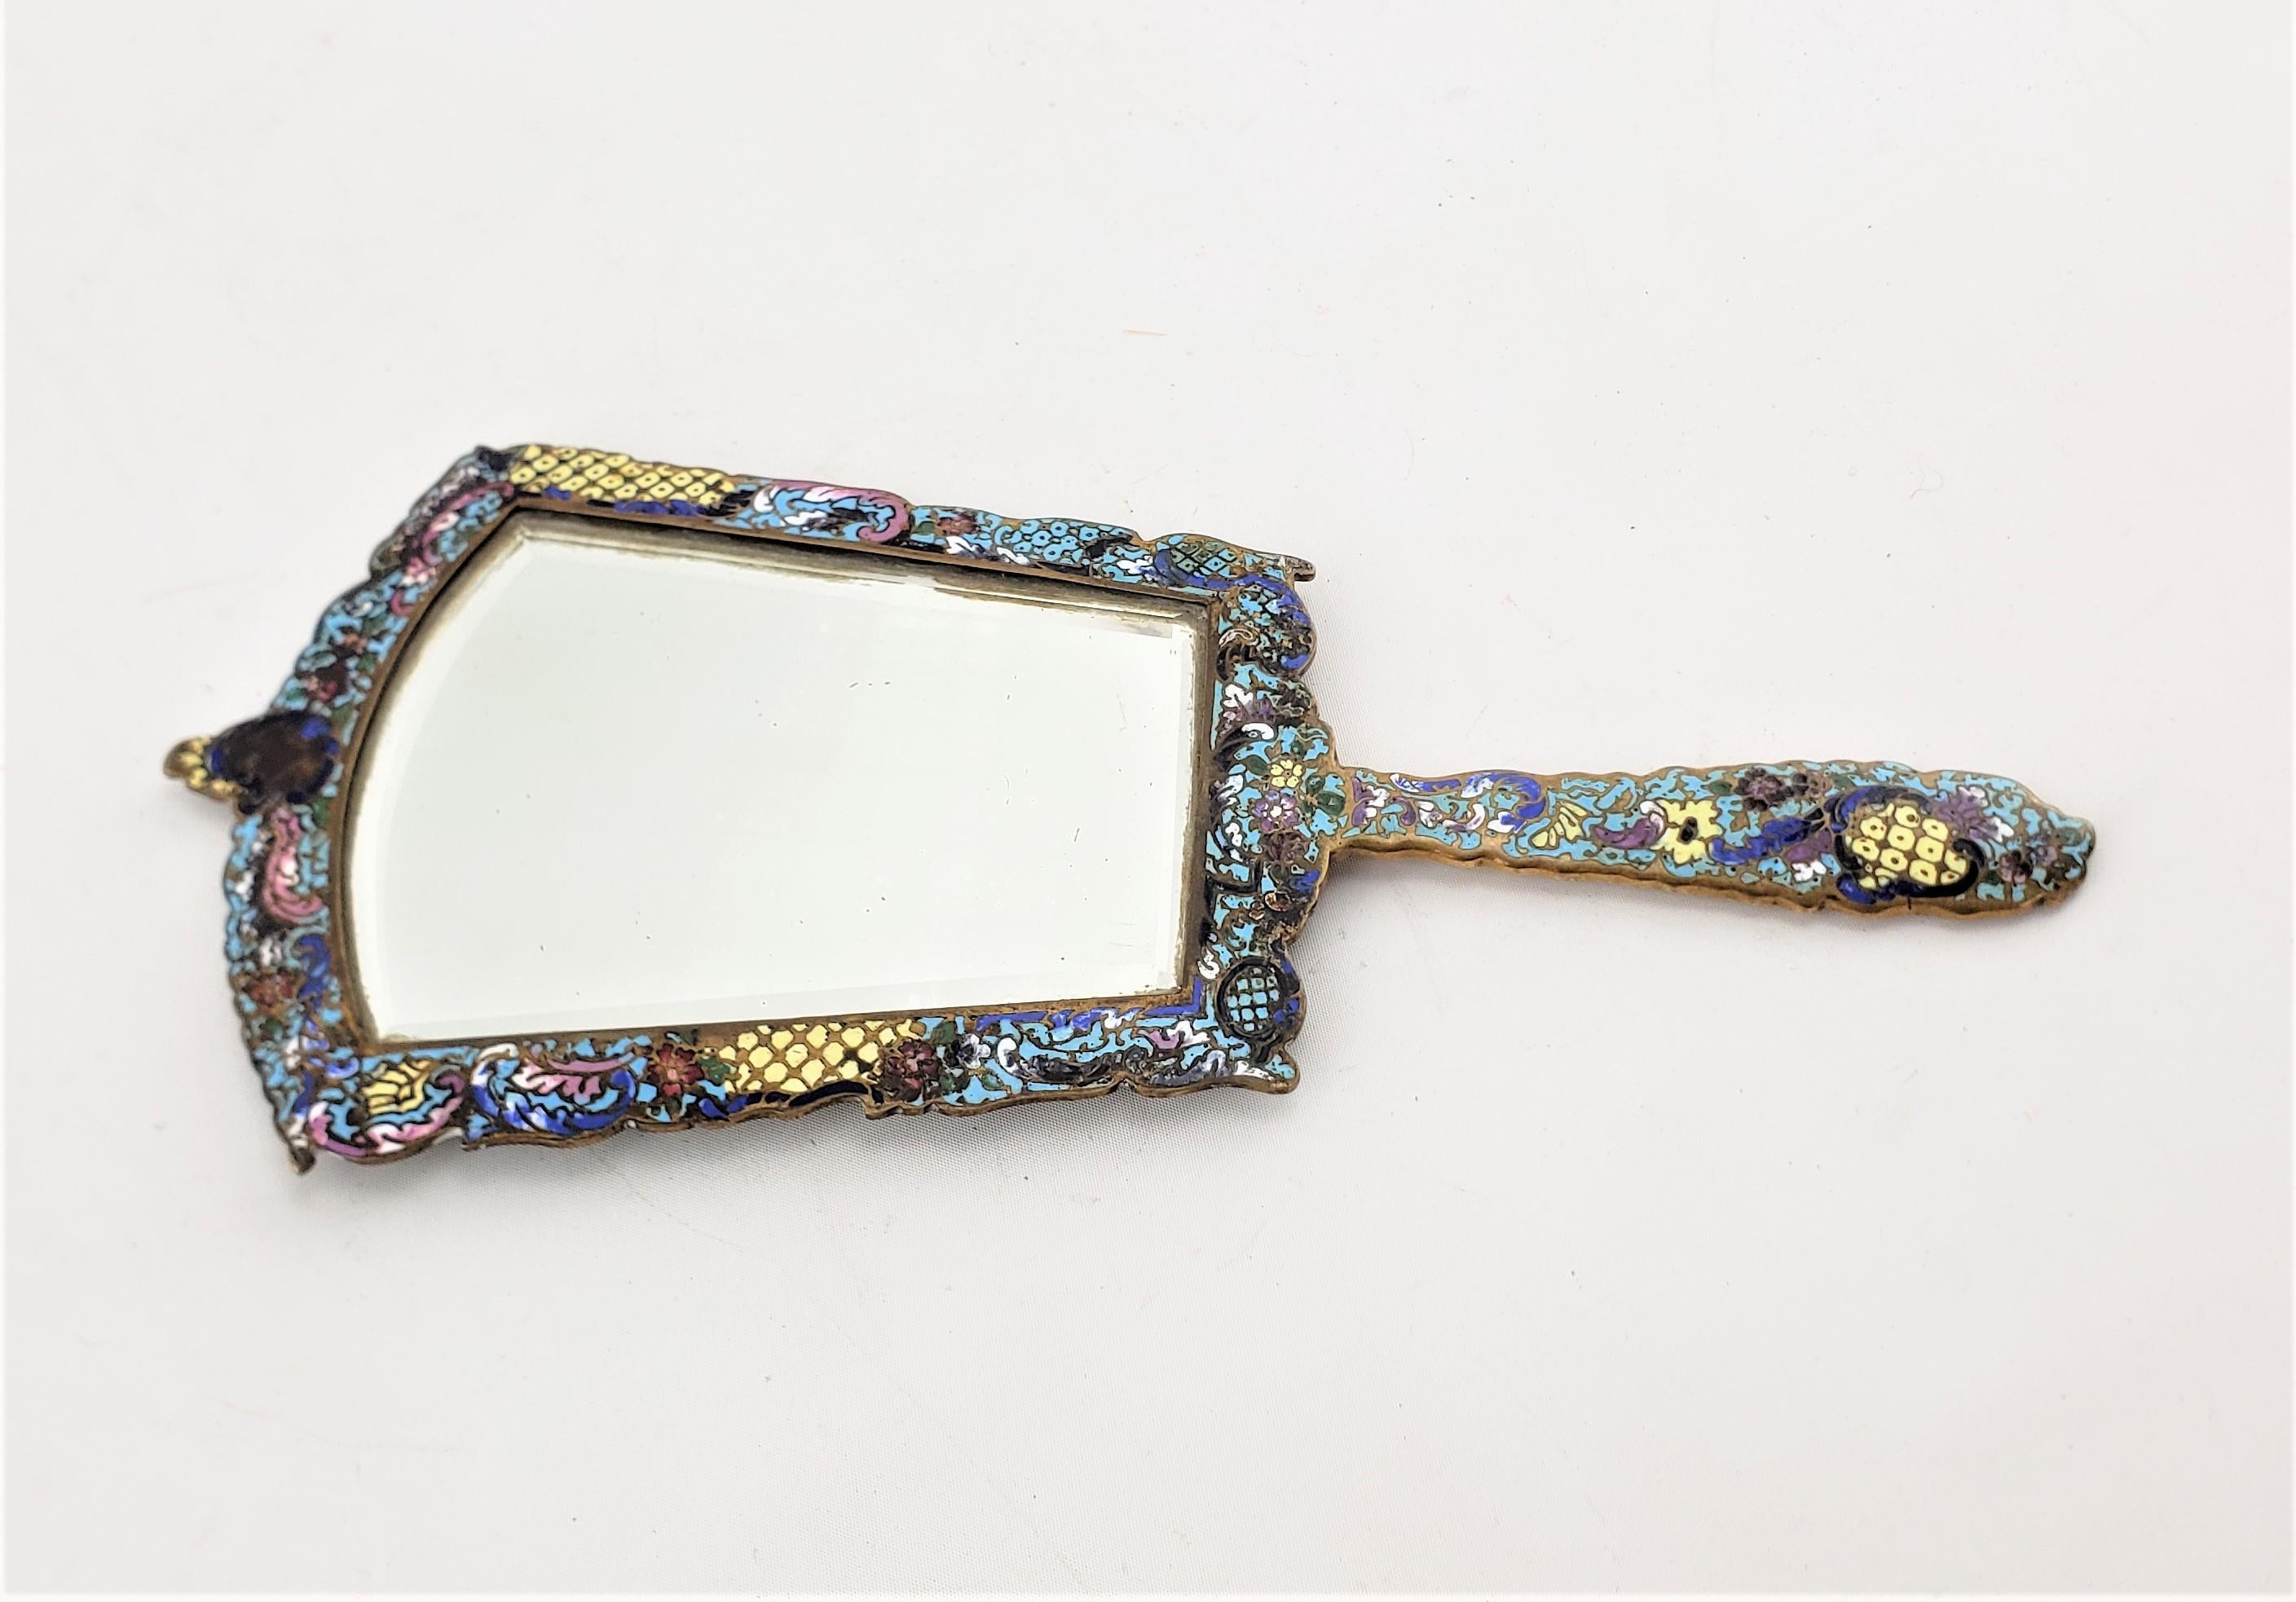 Antique French Champleve  Enameled Hand-Held Dresser Mirror with Floral Motif In Good Condition For Sale In Hamilton, Ontario